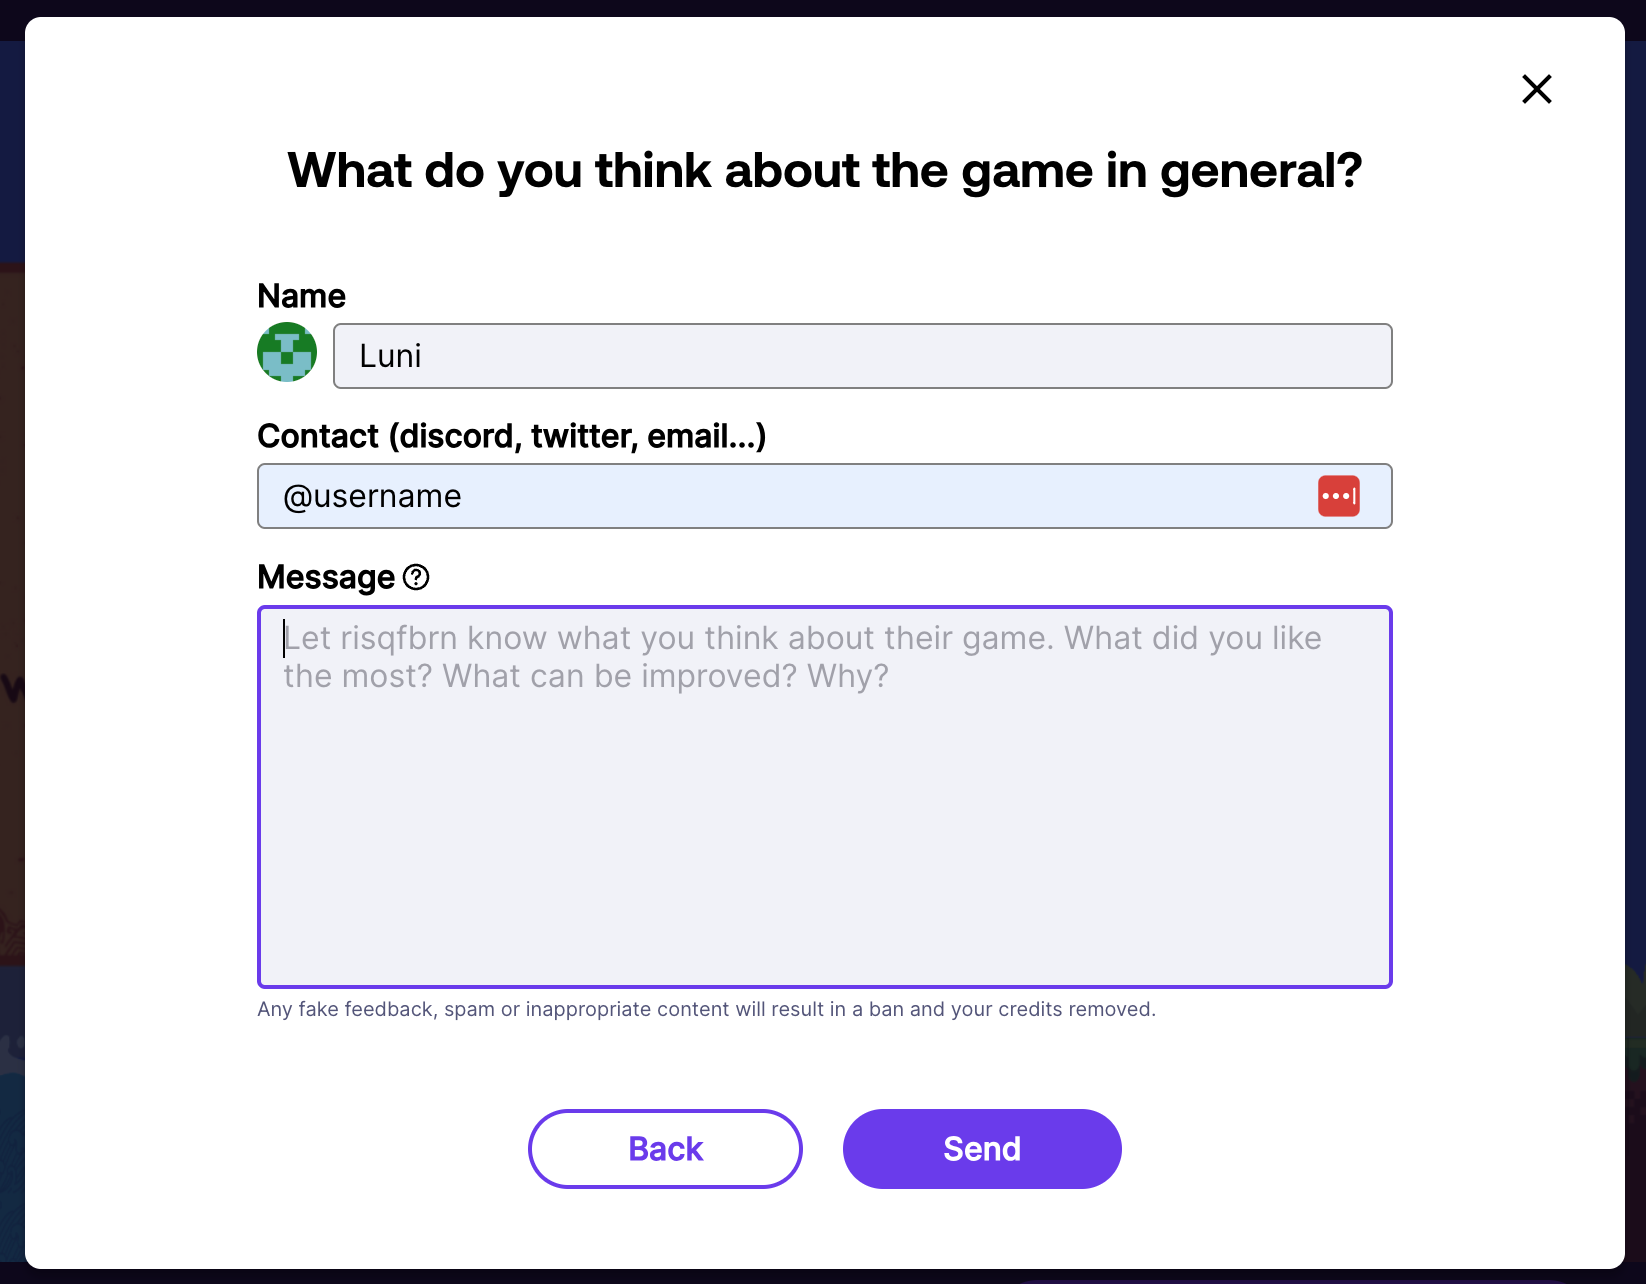 gd.games interface displaying the title "What do you think about the game in general?", and 3 inputs to be filled by the player: name, contact information and feedback message.